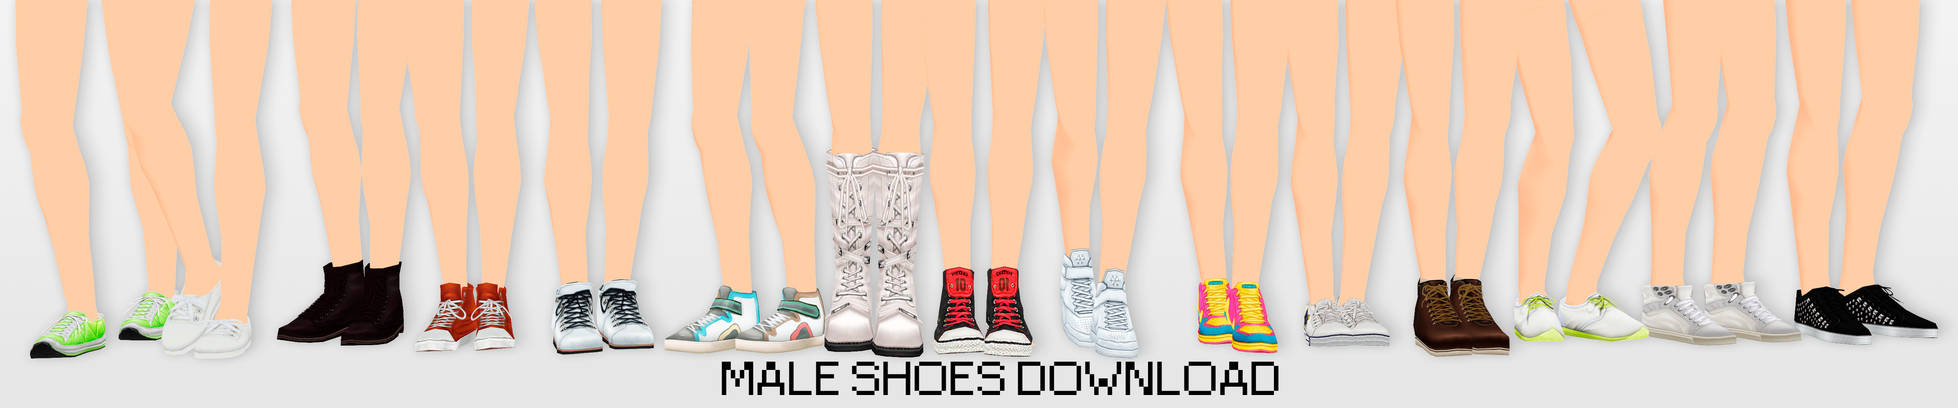 MMD Male Shoes DL